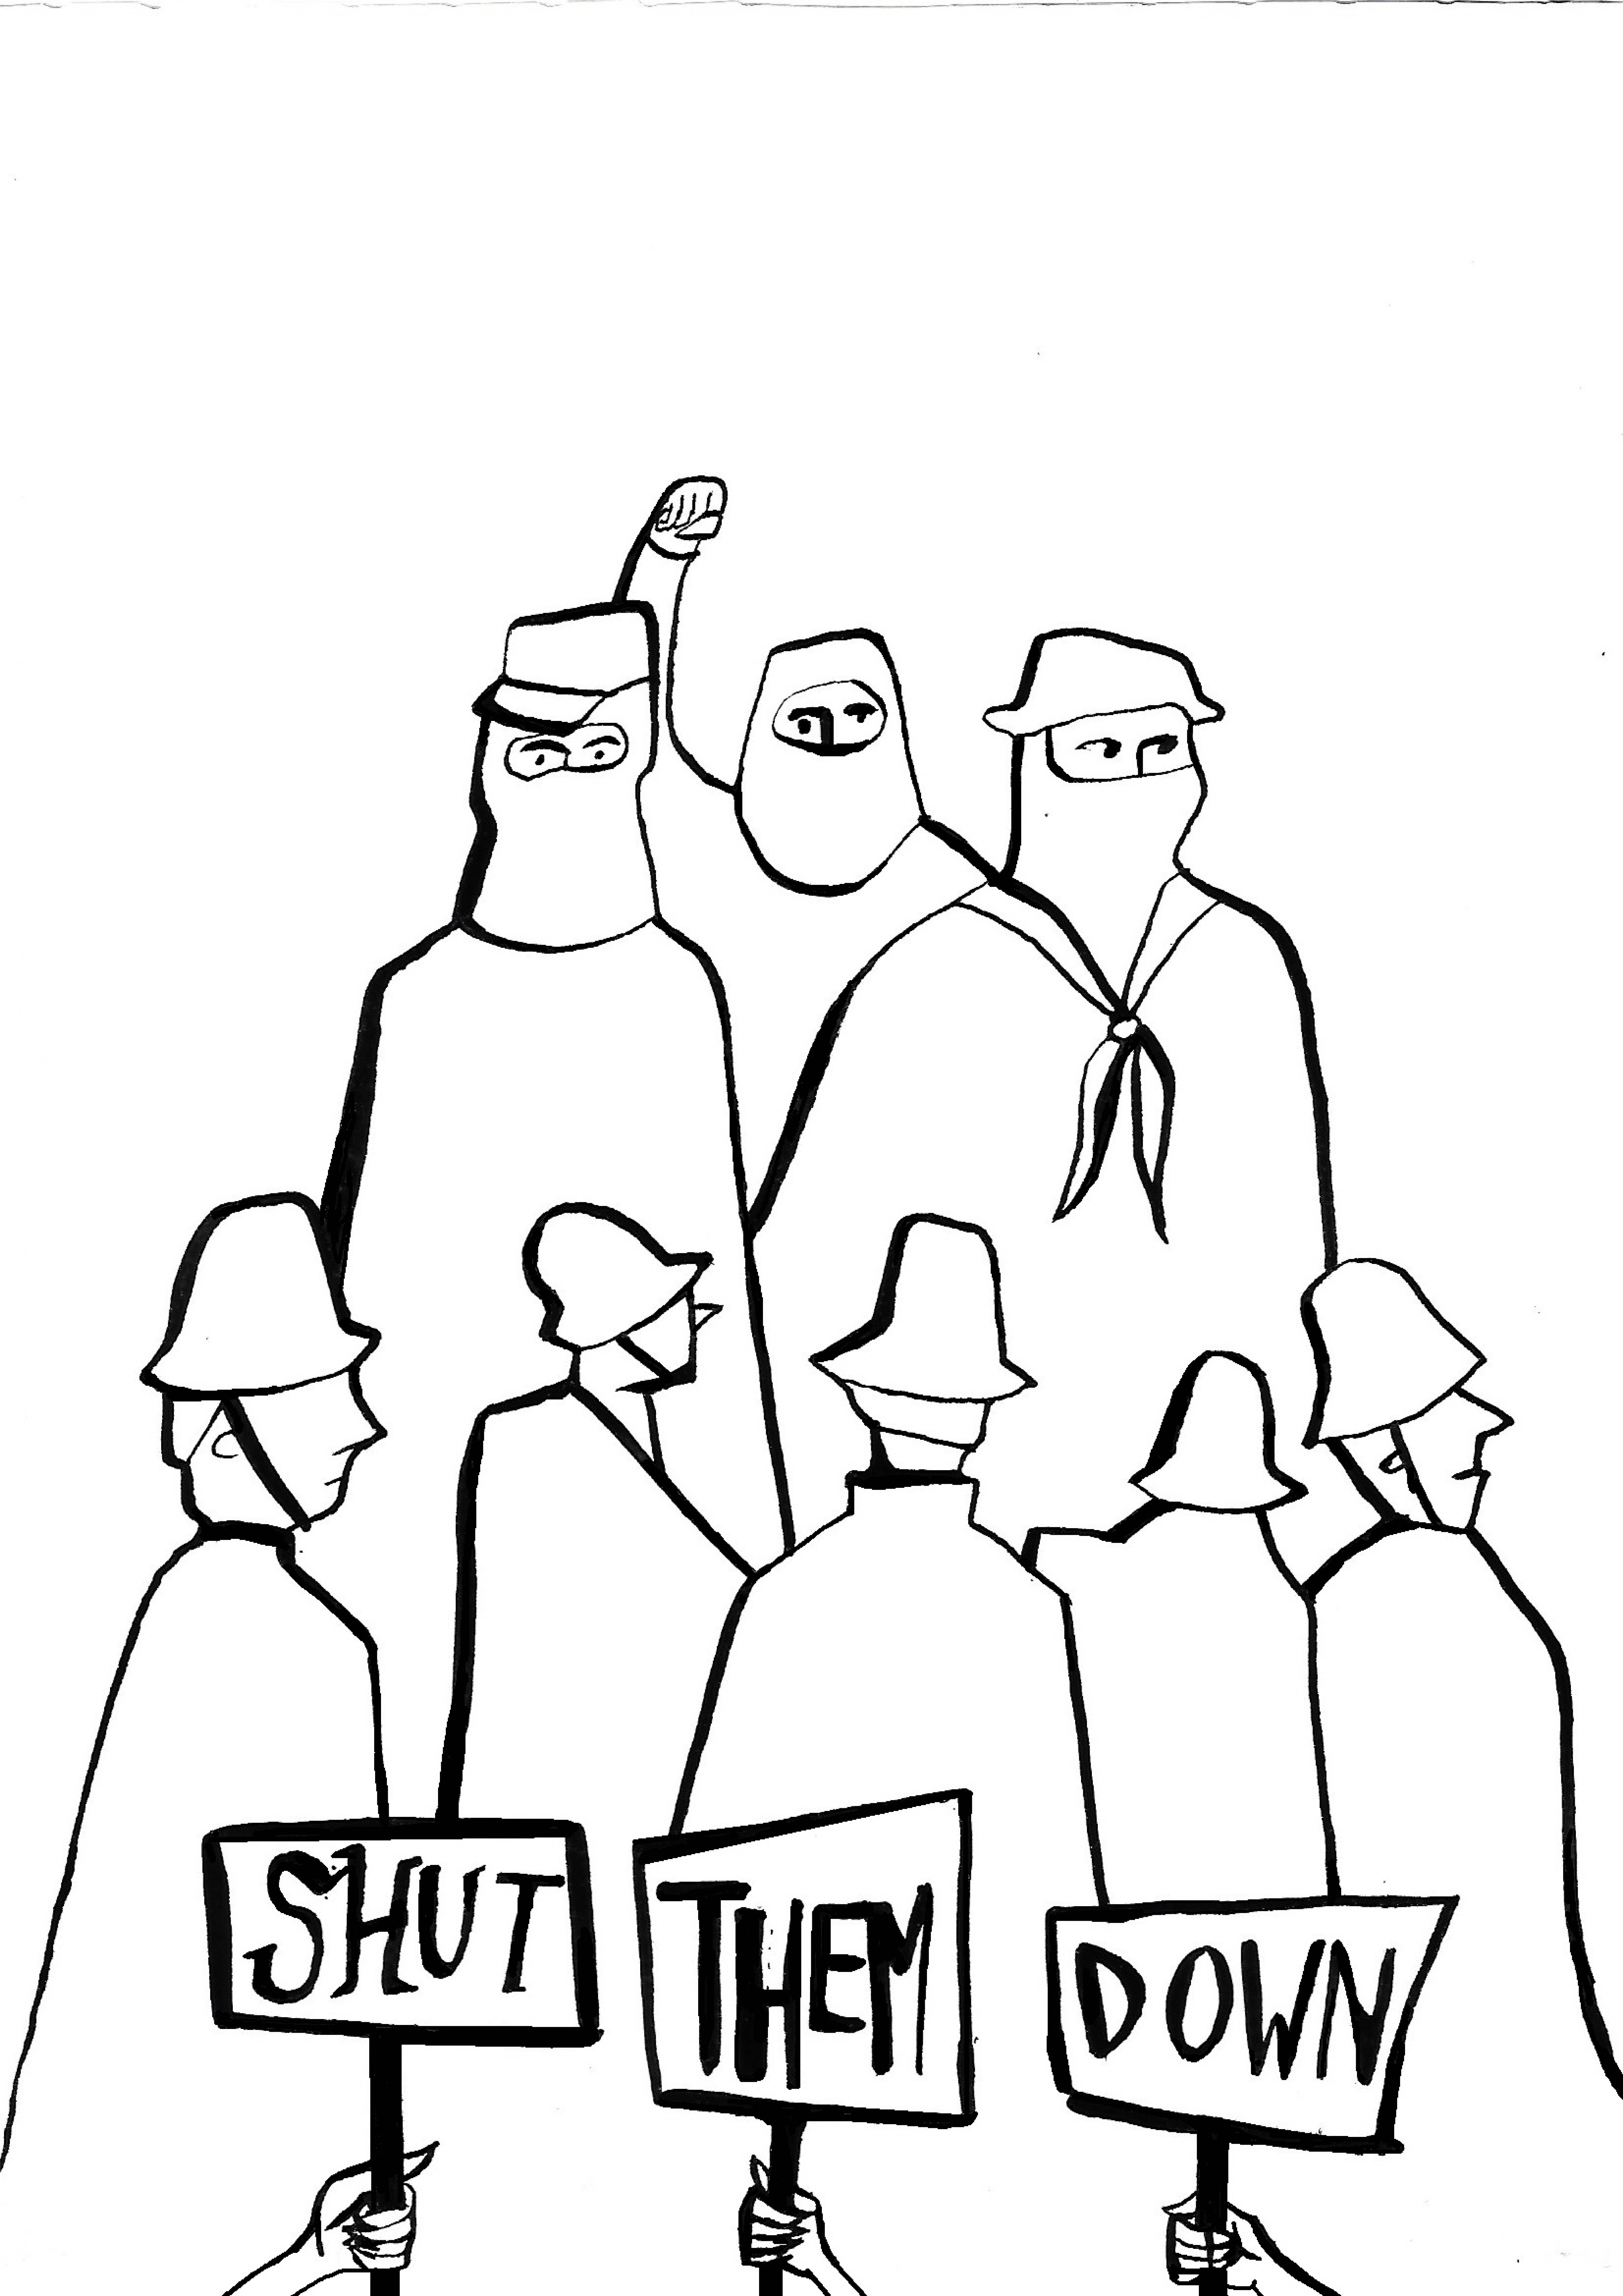 Sketch of officers guarding minority ethinic groups with protestors with signs saying 'SHUT THEM DOWN'